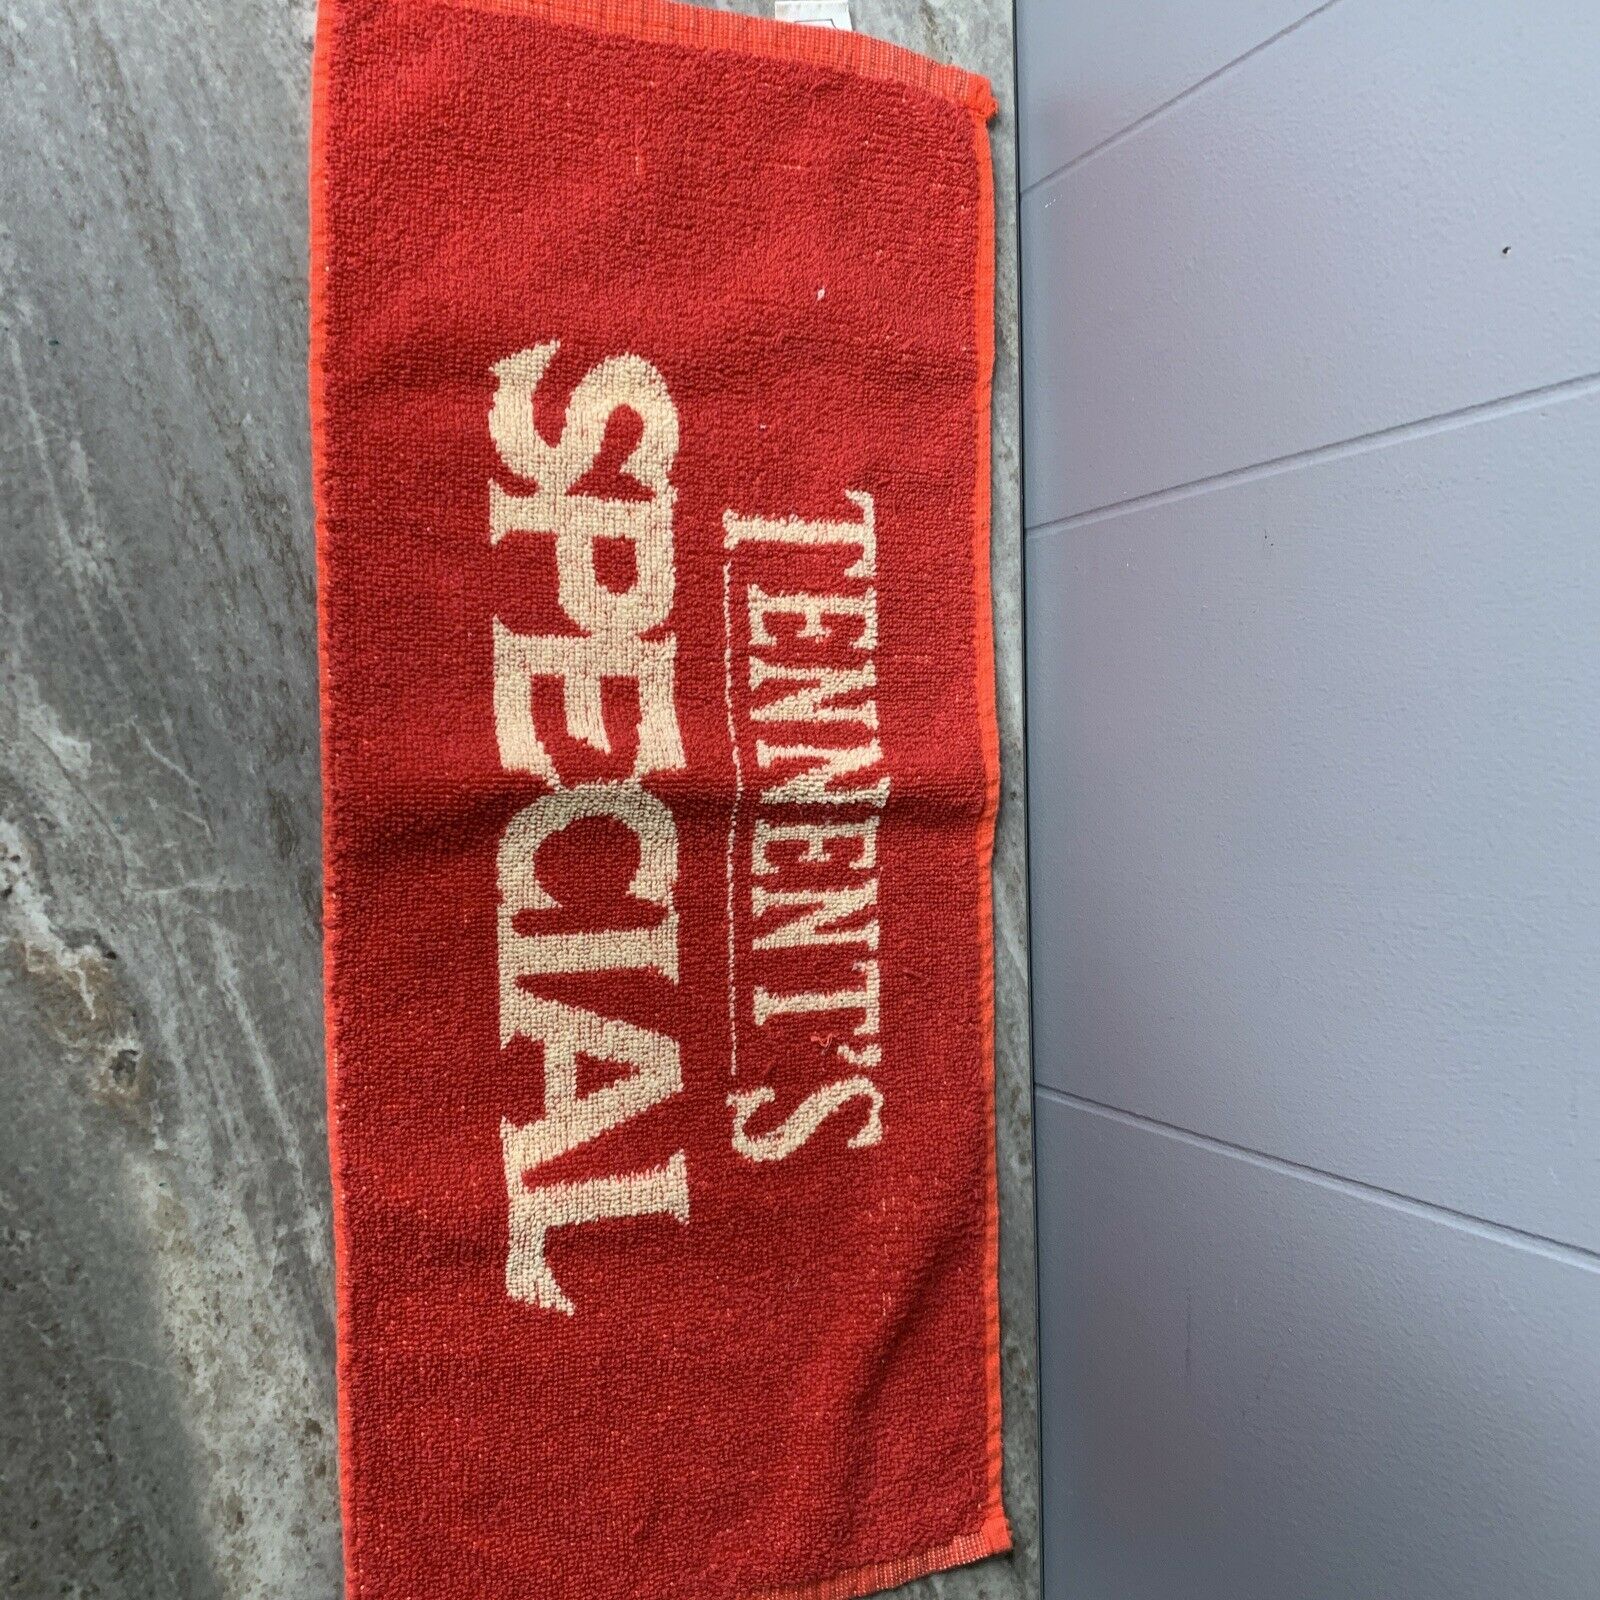 Tennent’s Special British Beer Bar Towel - Pub Drink Mancave Decor Red Vintage